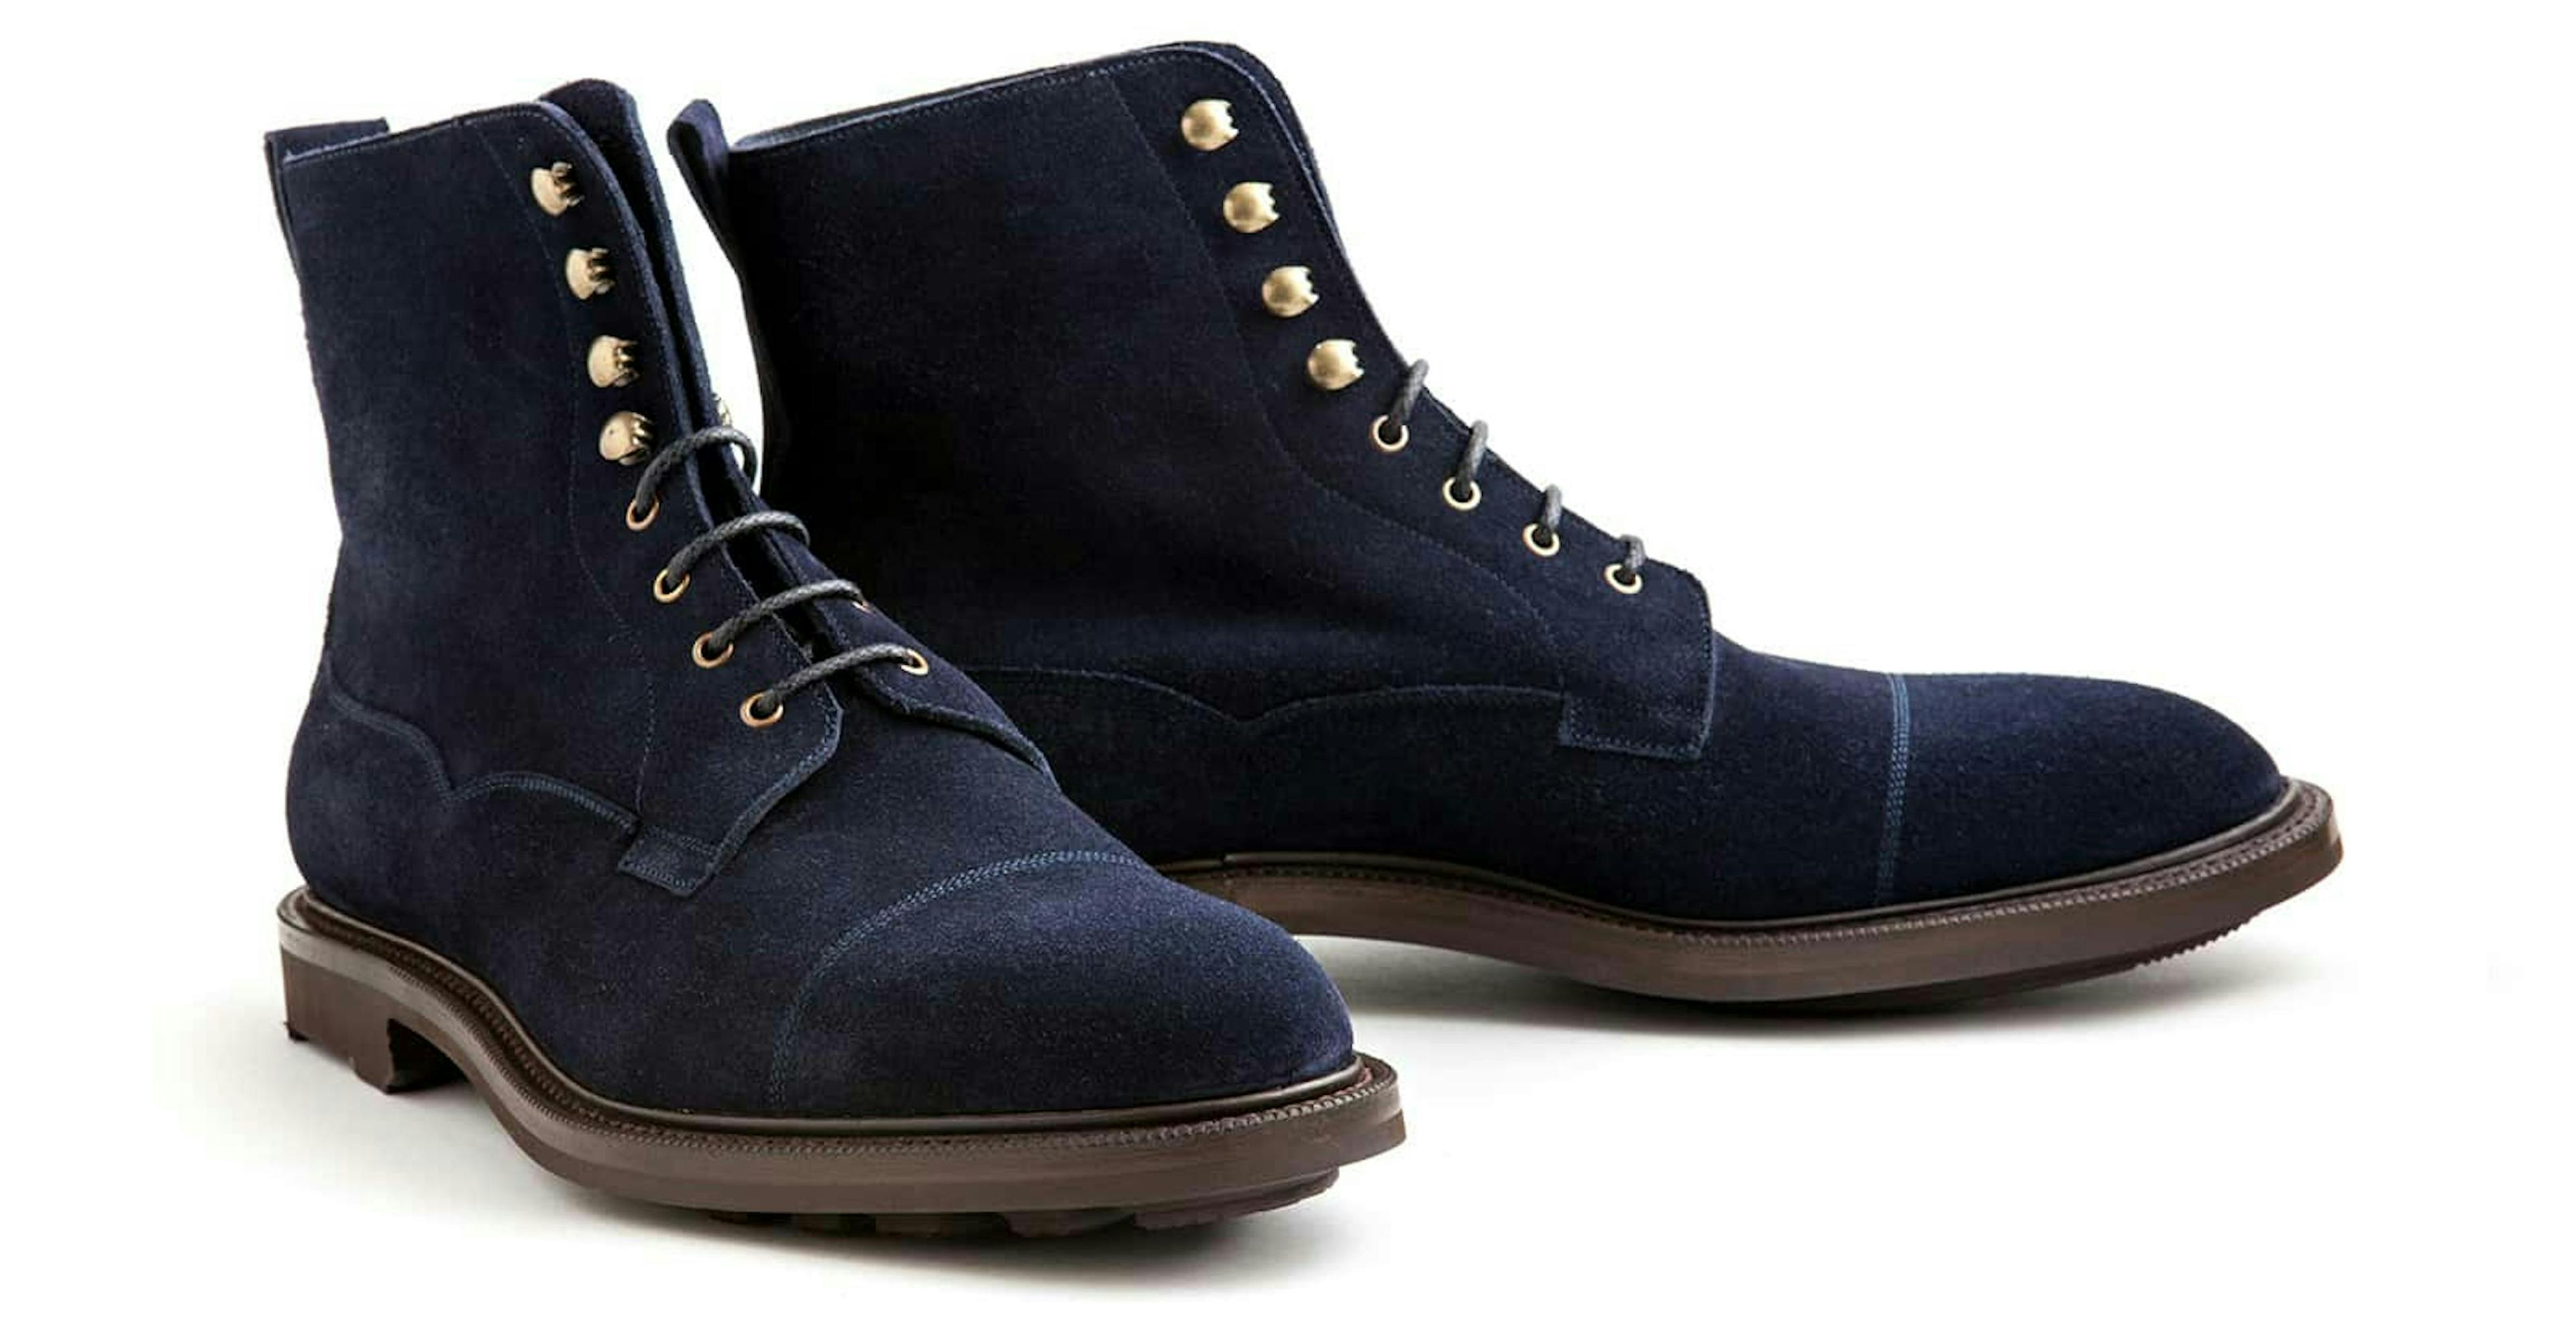 Front view of an Edward Green Galway in navy suede.